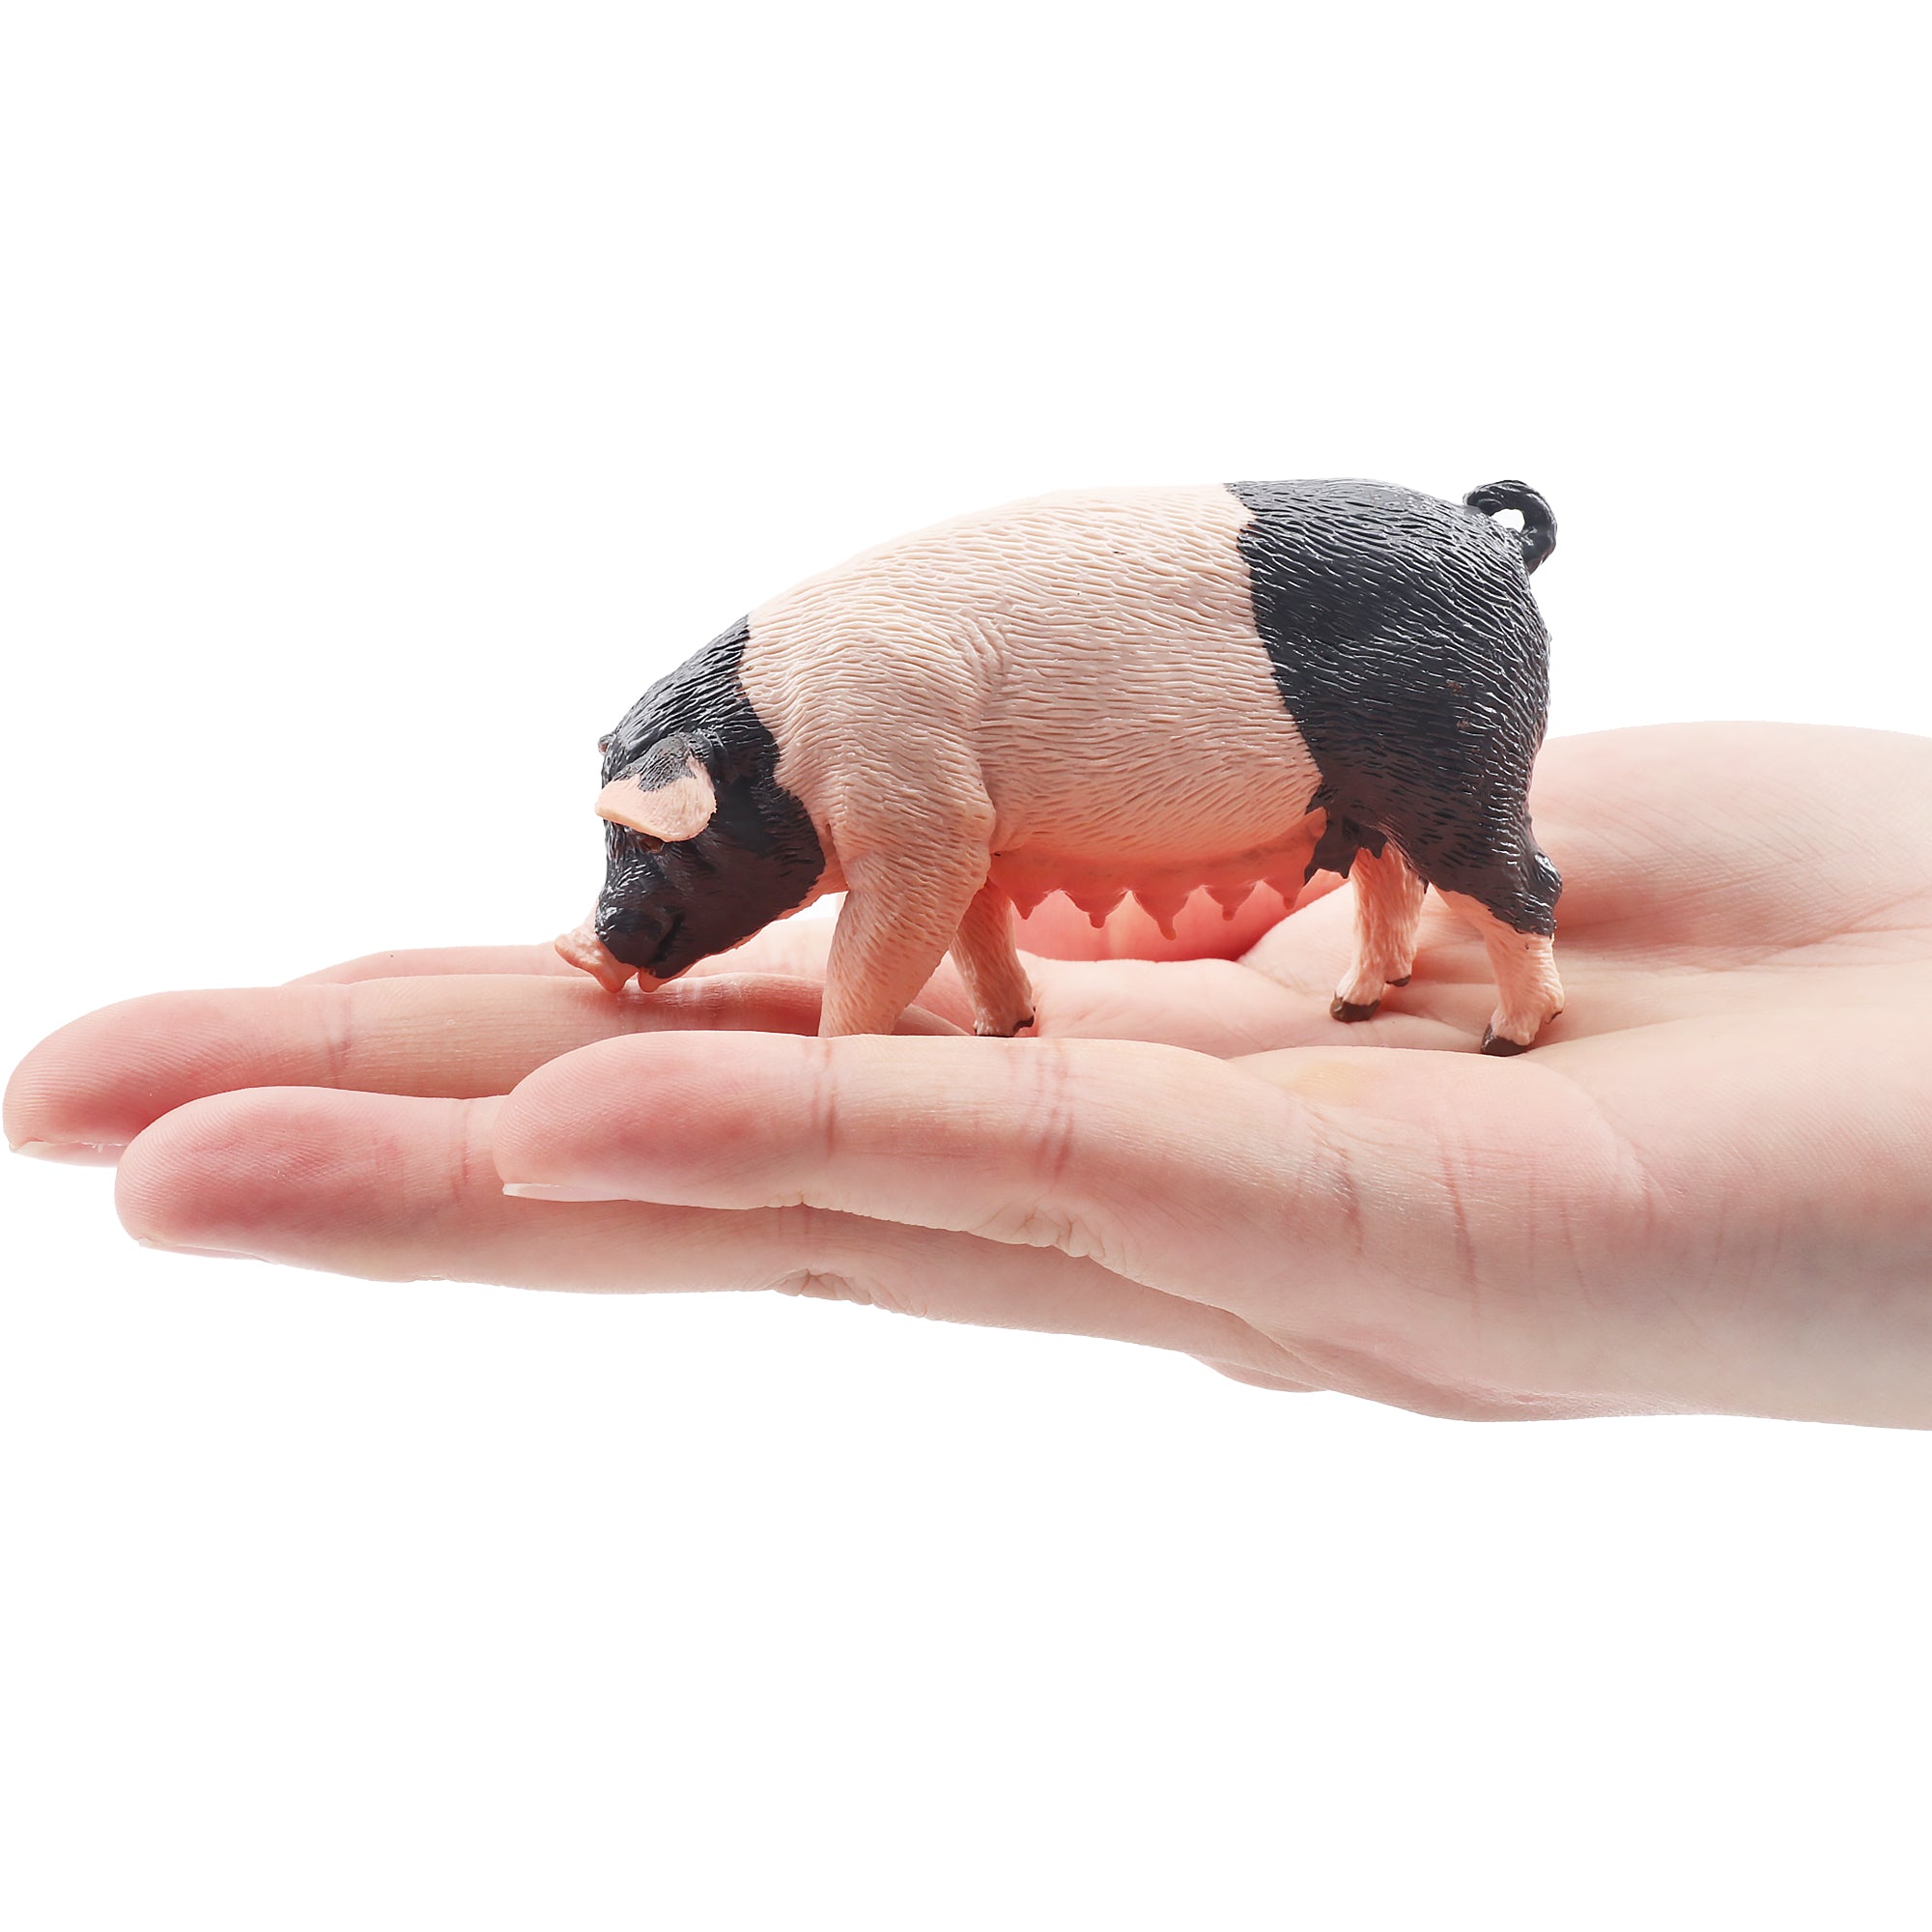 Toymany Standing Grey Female Adult Pig Figurine Toy-on hand